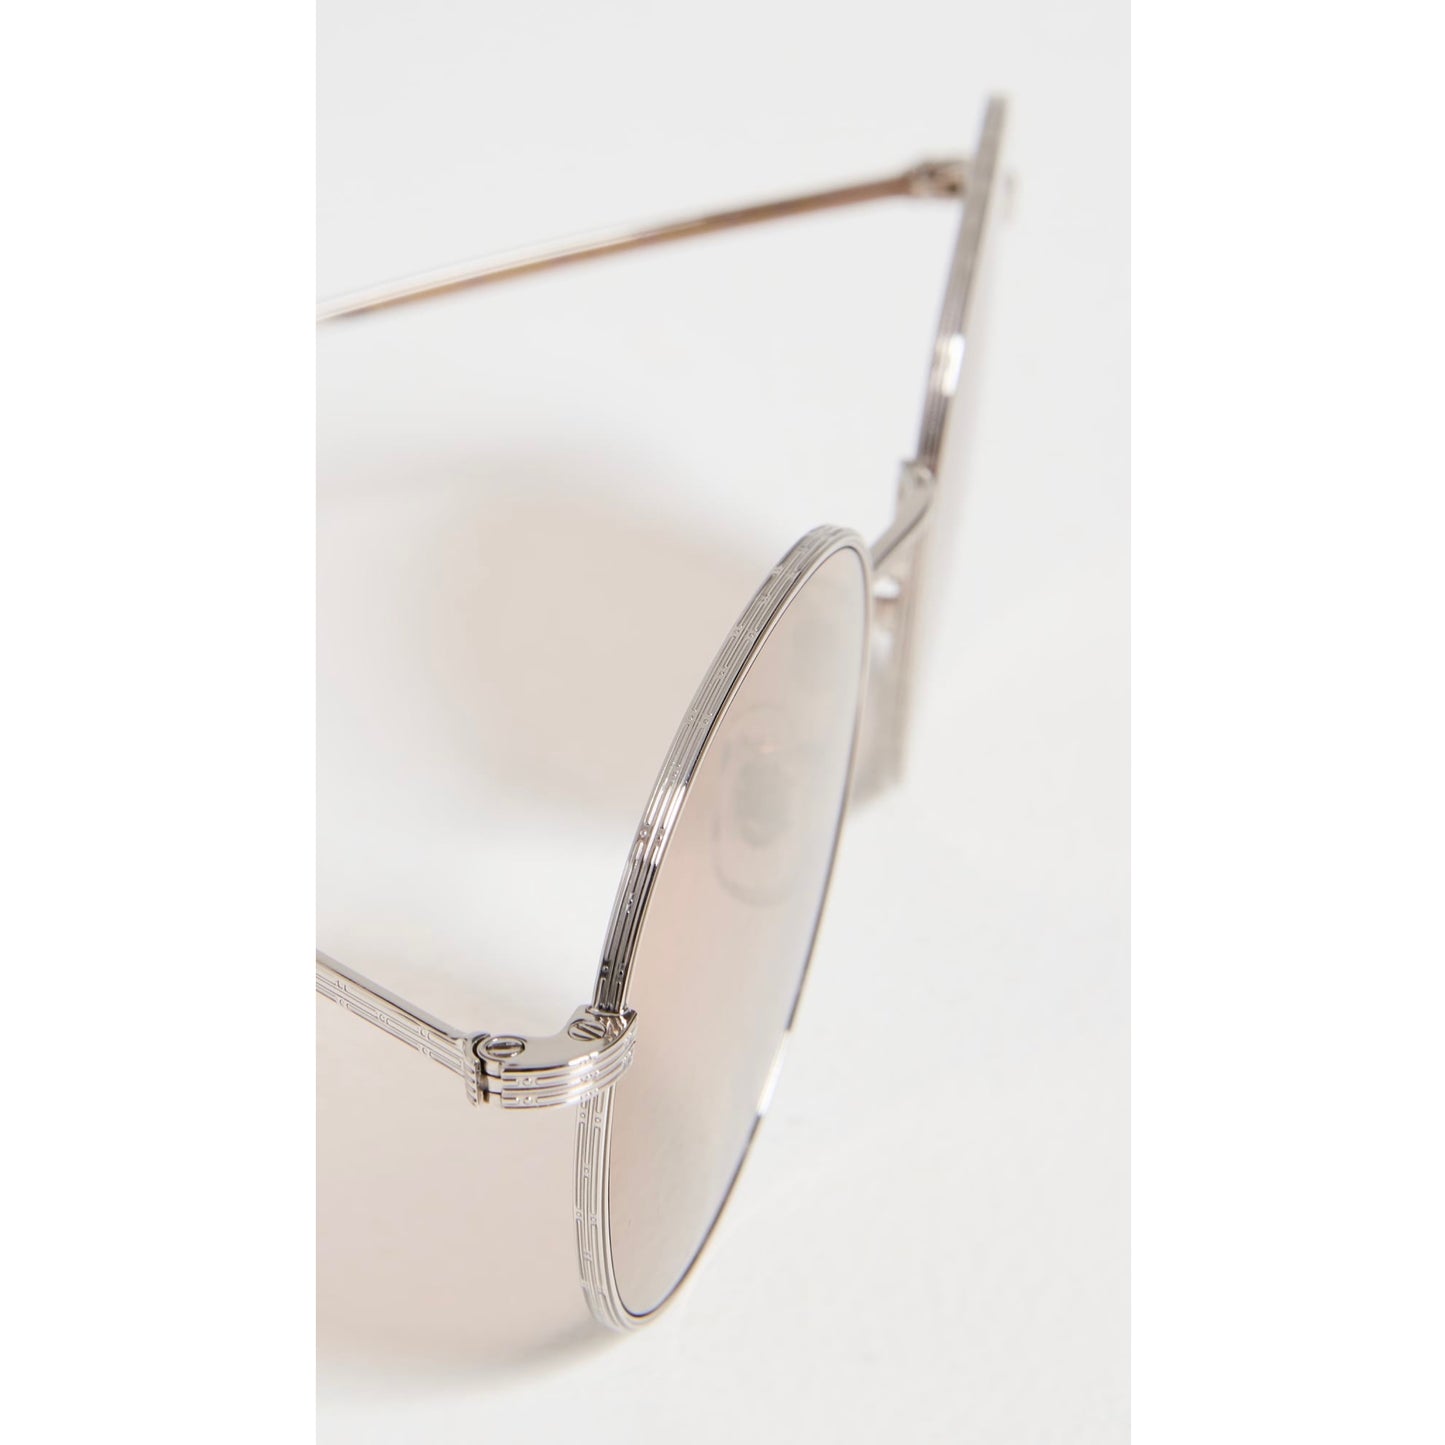 Oliver Peoples Altair Sunglasses